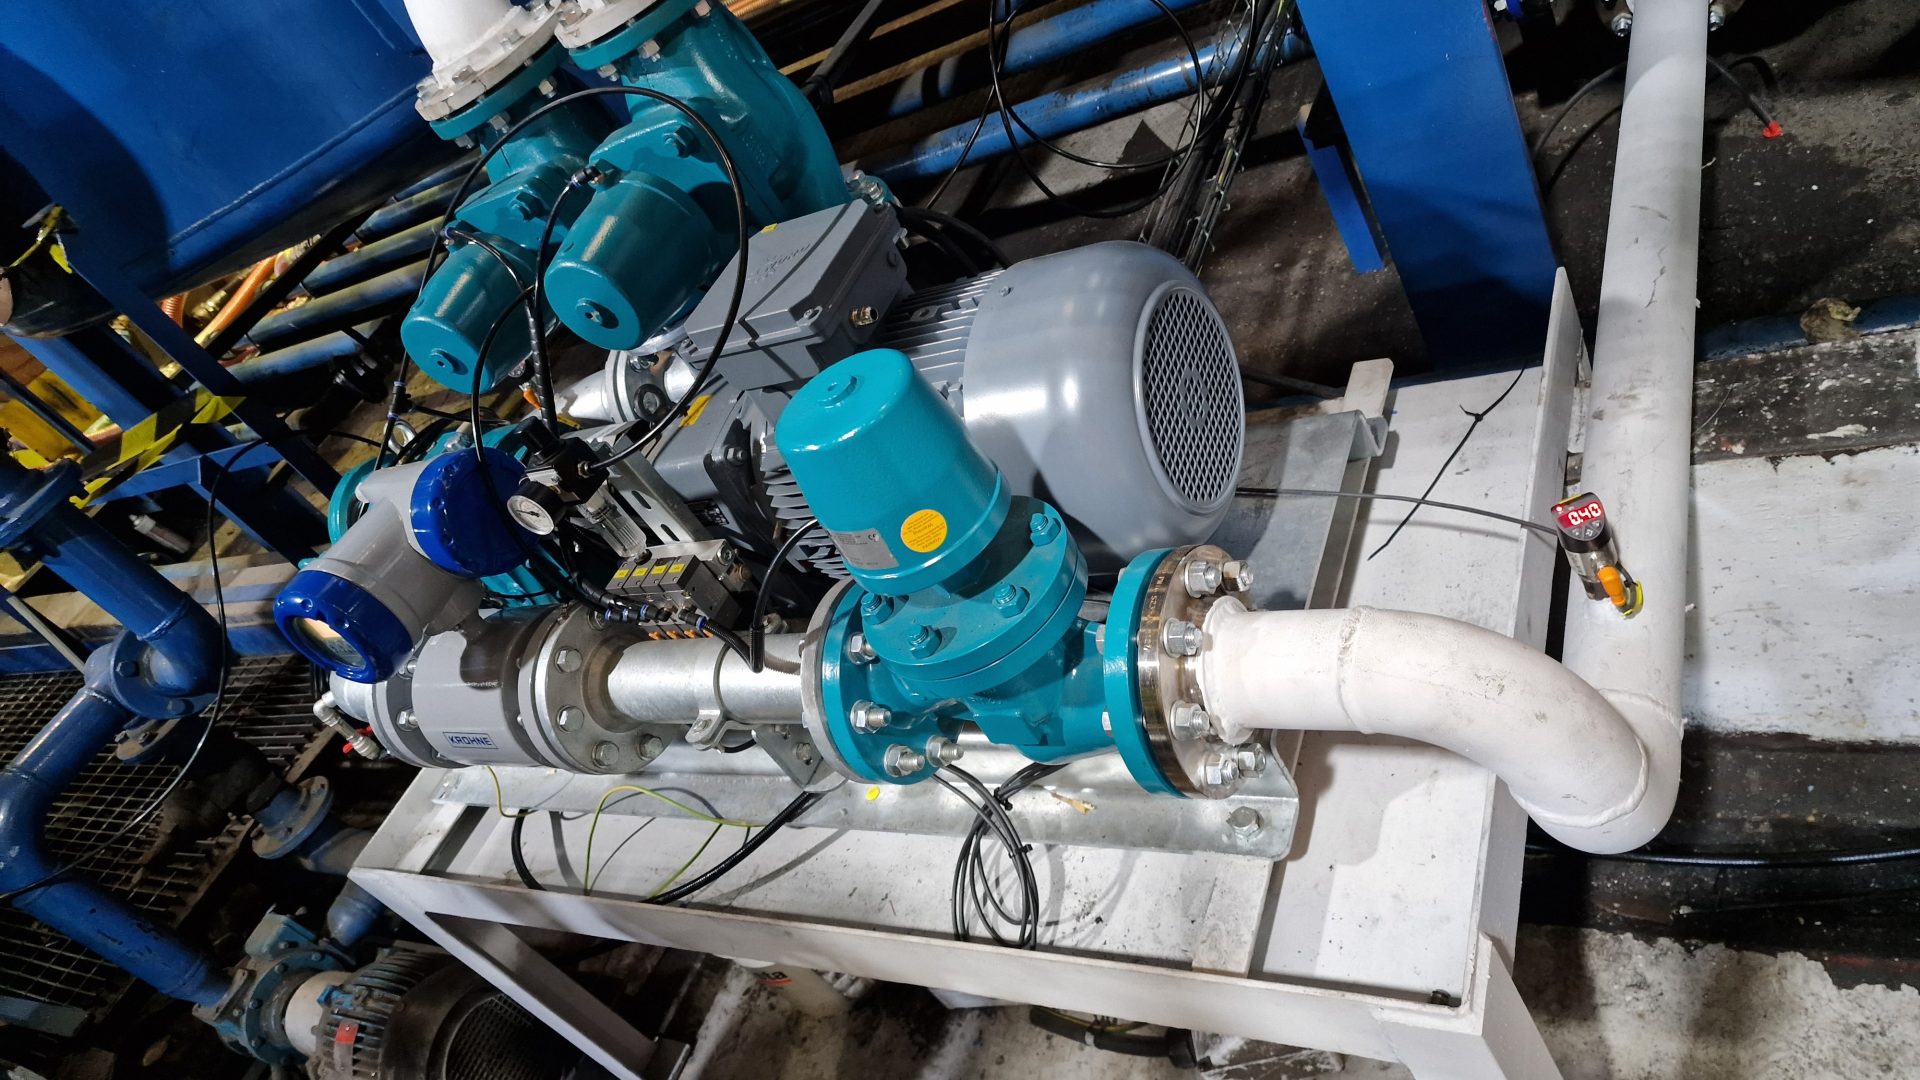 The new Borger pump at Moove which is for a 3-bar application